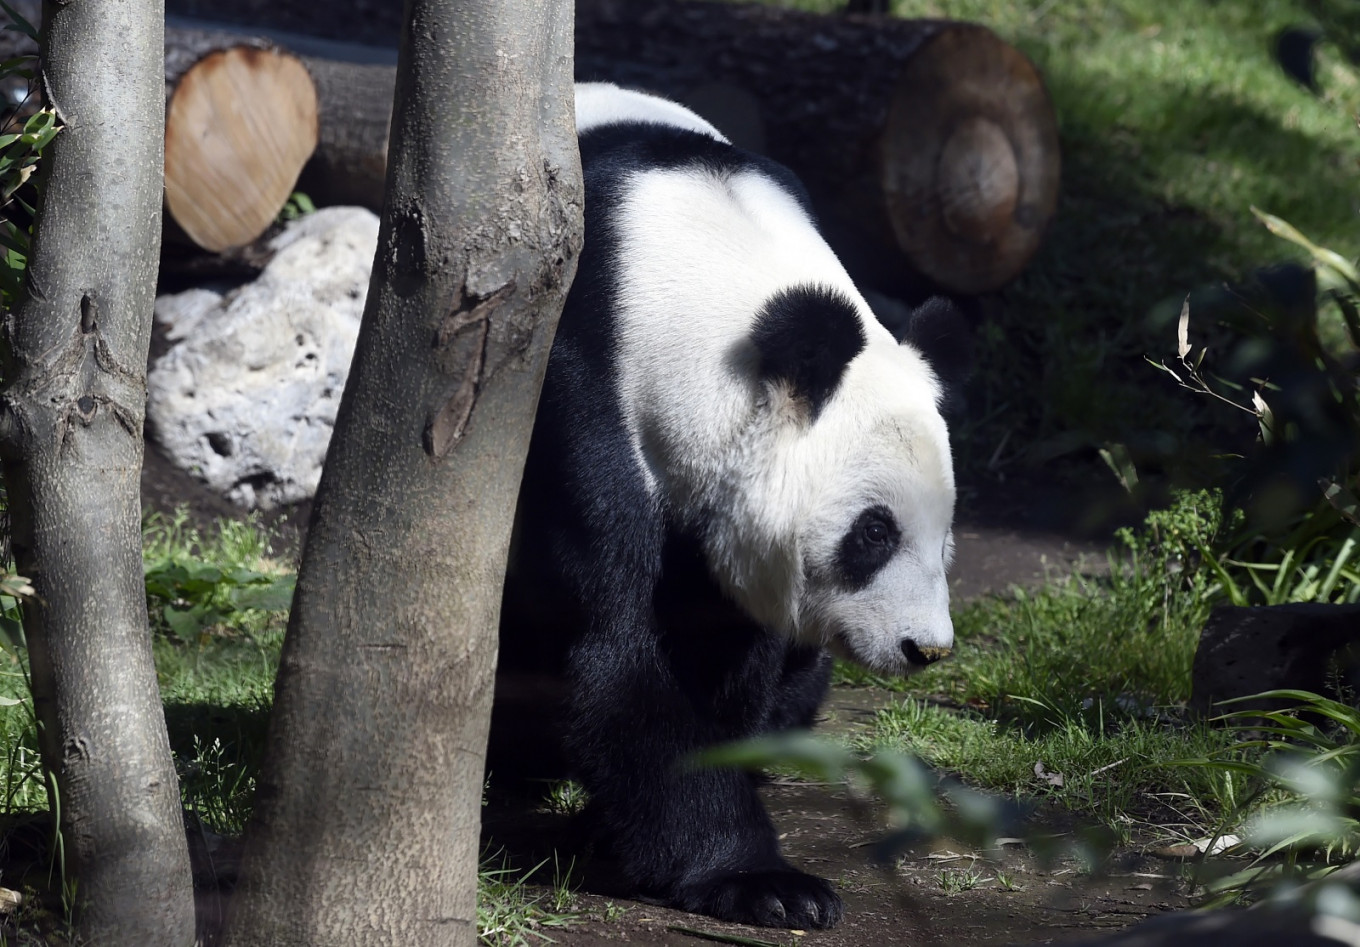 What pandas are not owned by China?